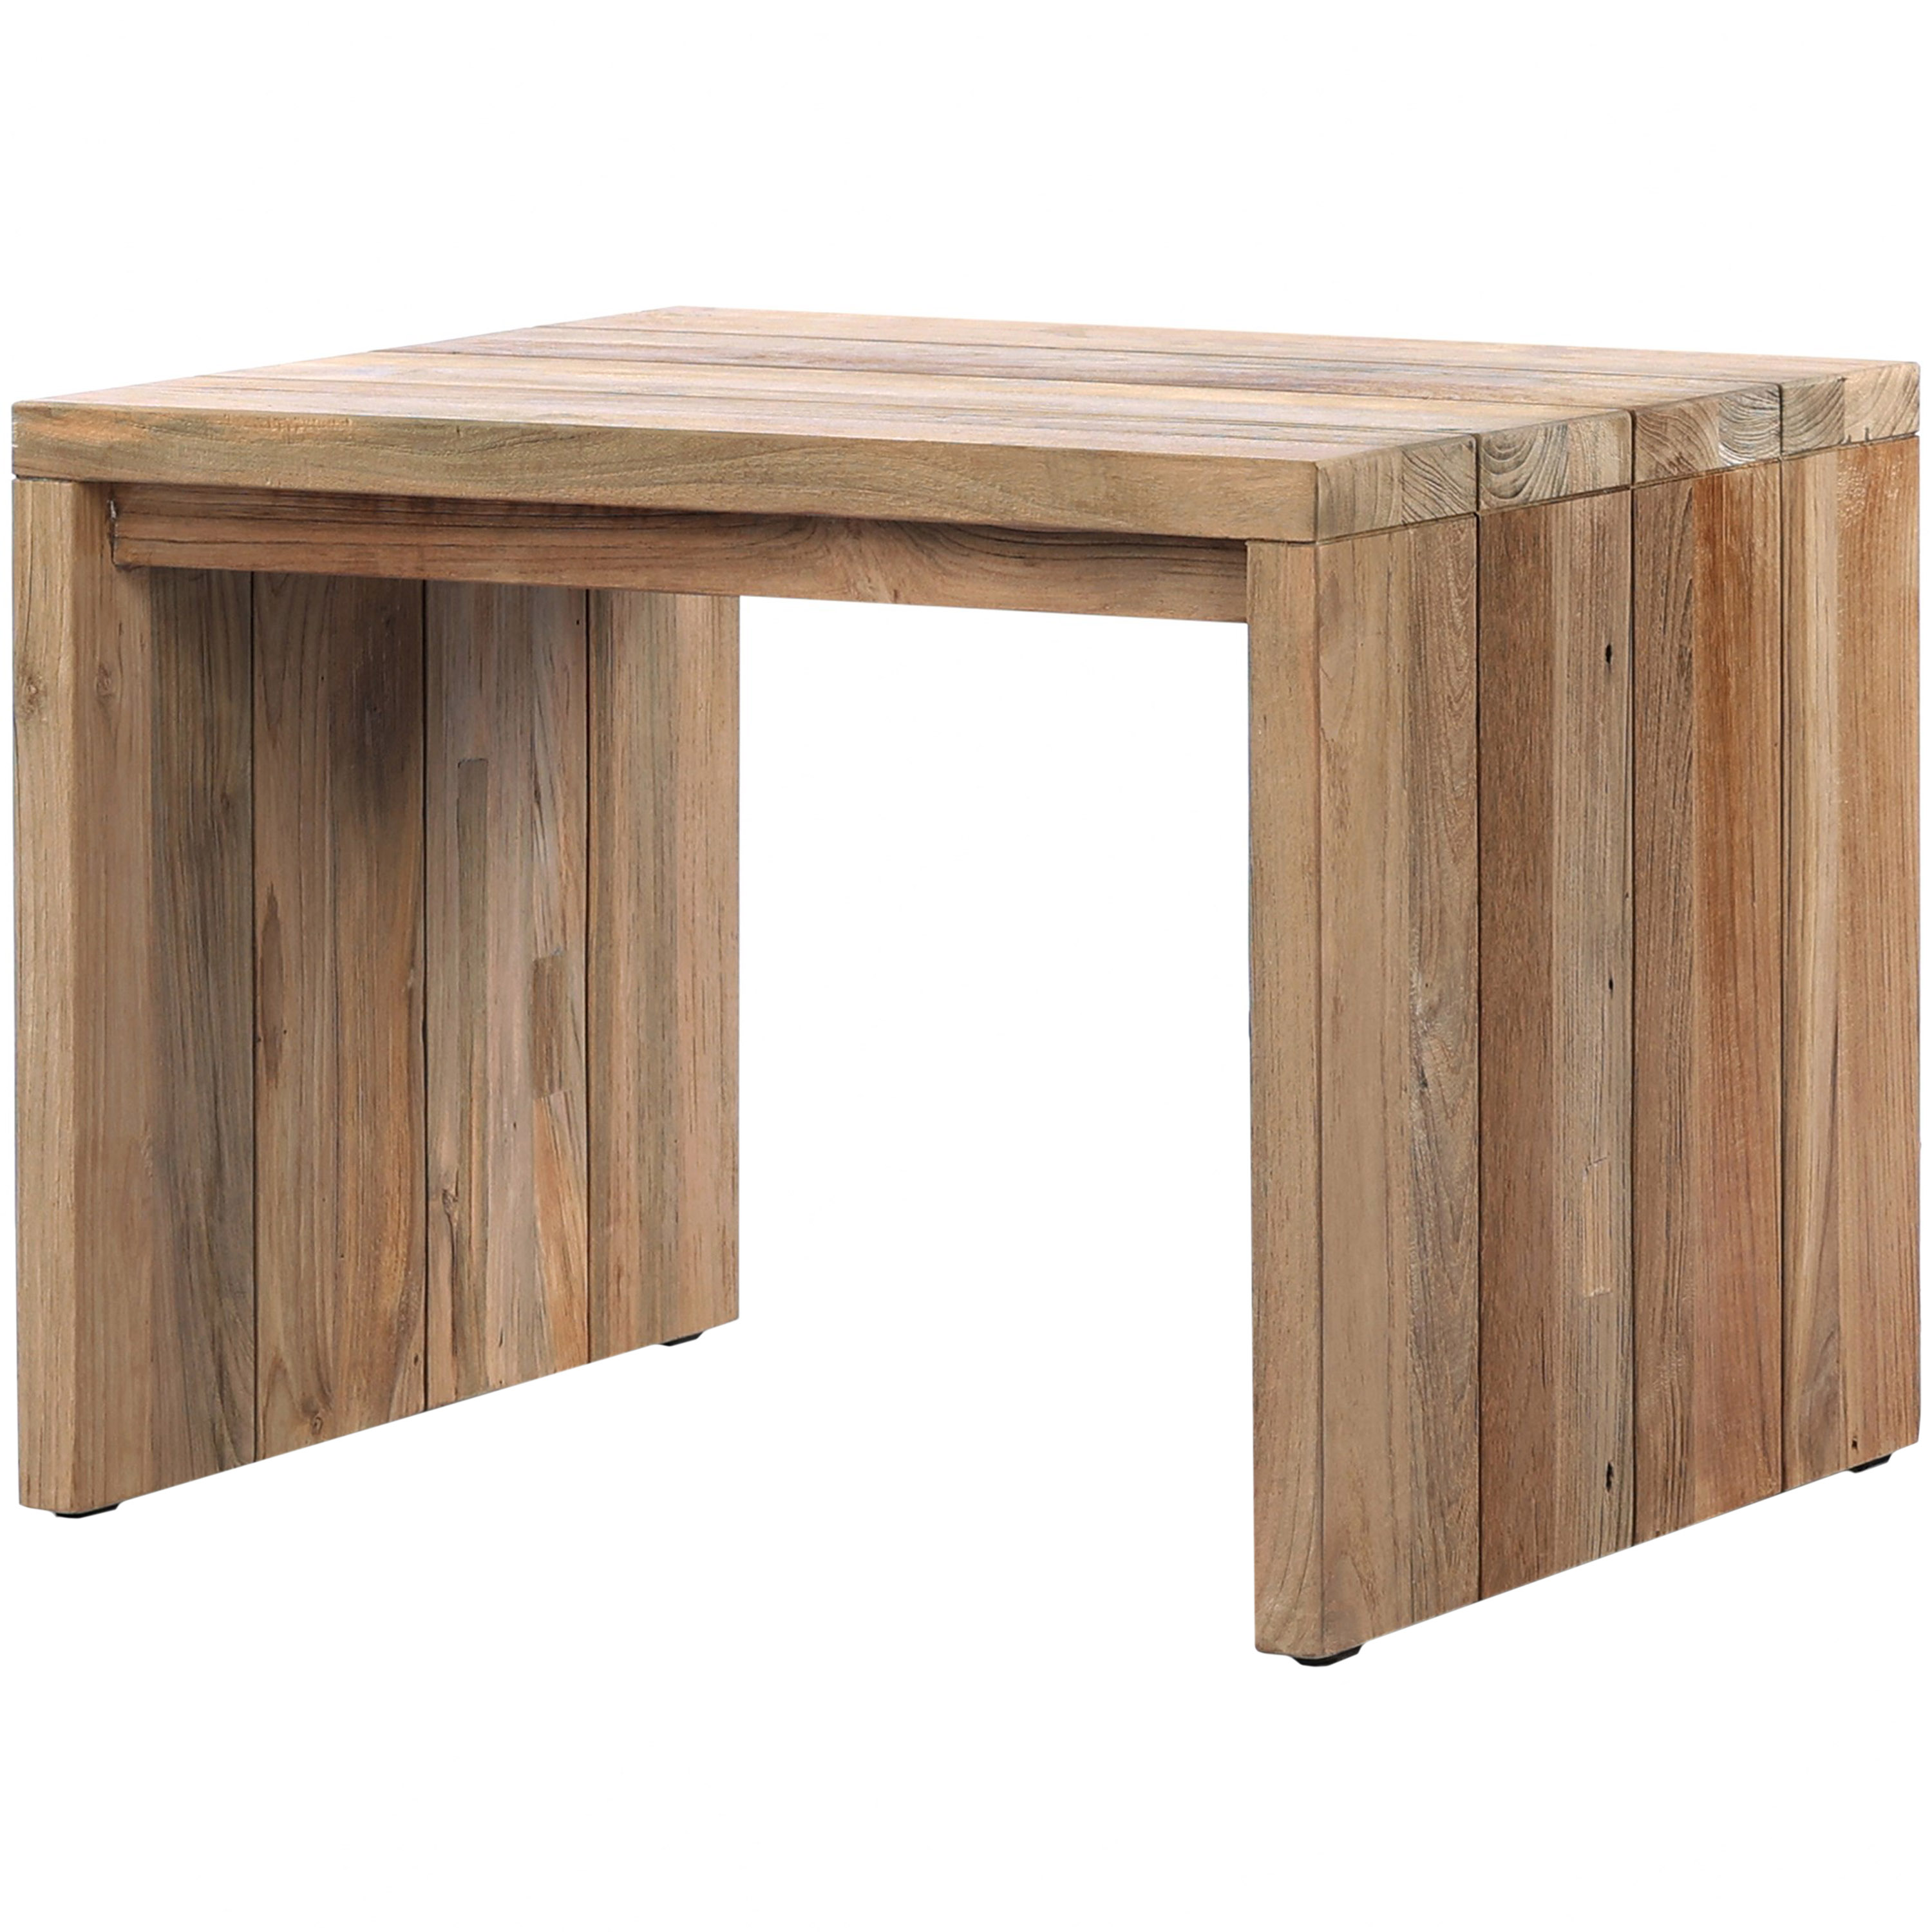 Evie Outdoor End Table, Reclaimed Natural